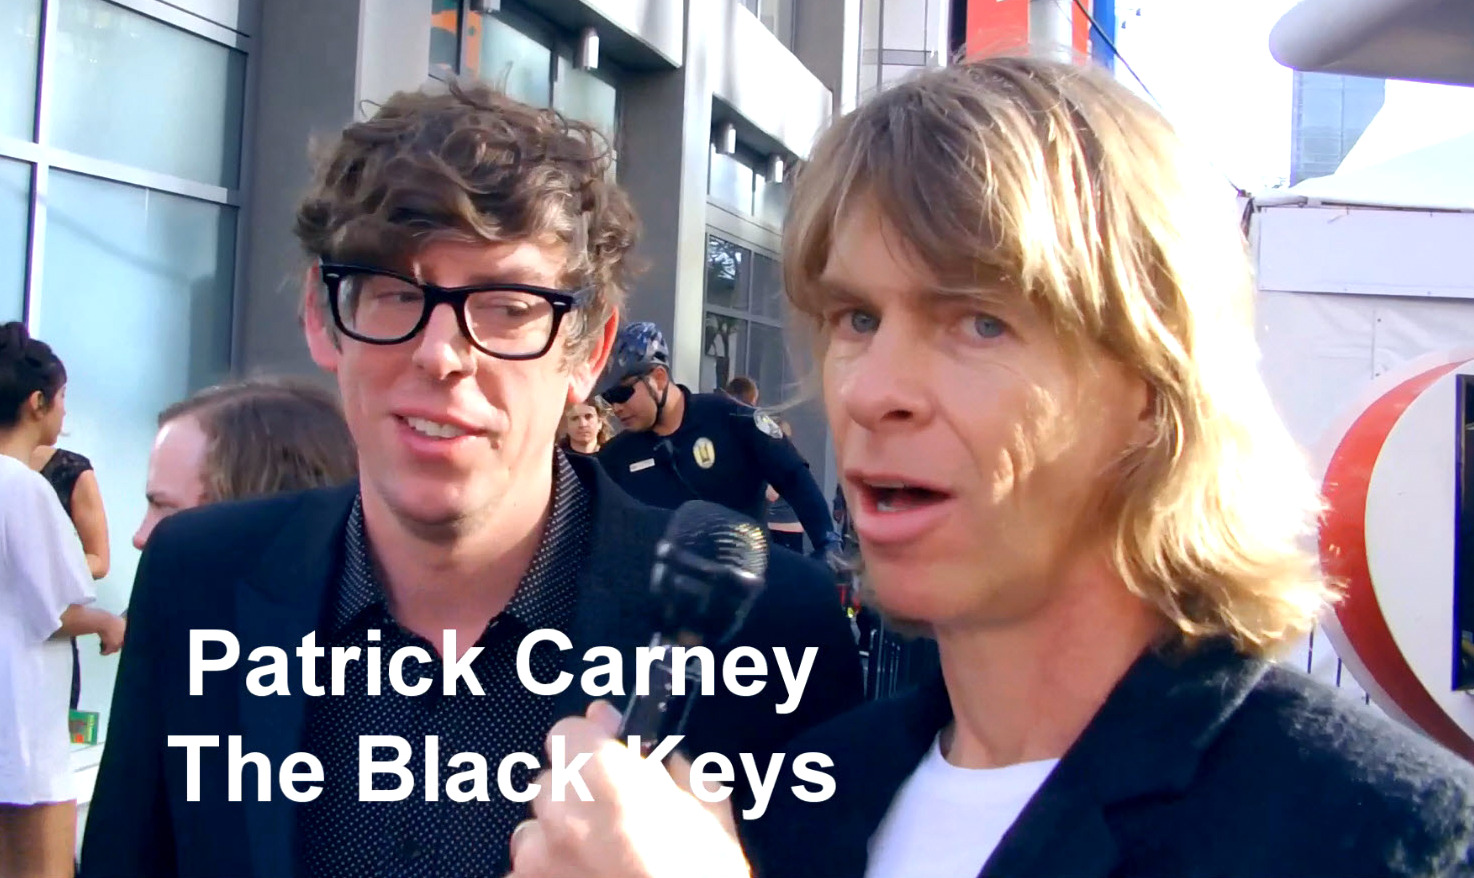 Gregory Graham aka Heavy Metal Greg interviewing Patrick Carney of The Black Keys at the 2015 Grammy Awards.